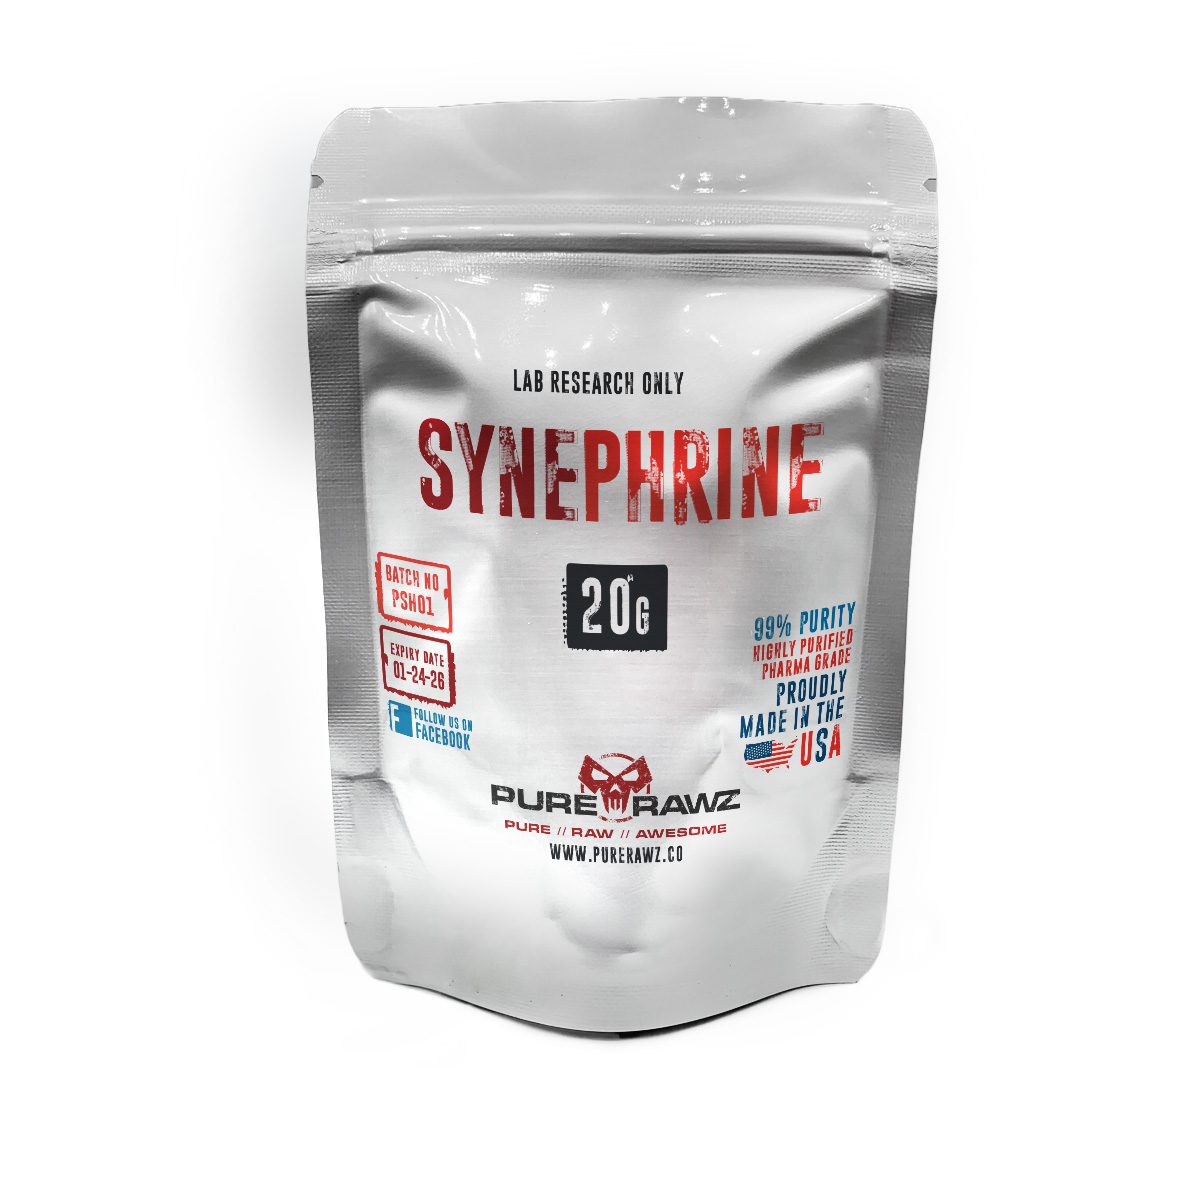 Where to Buy - Synephrine Supplement